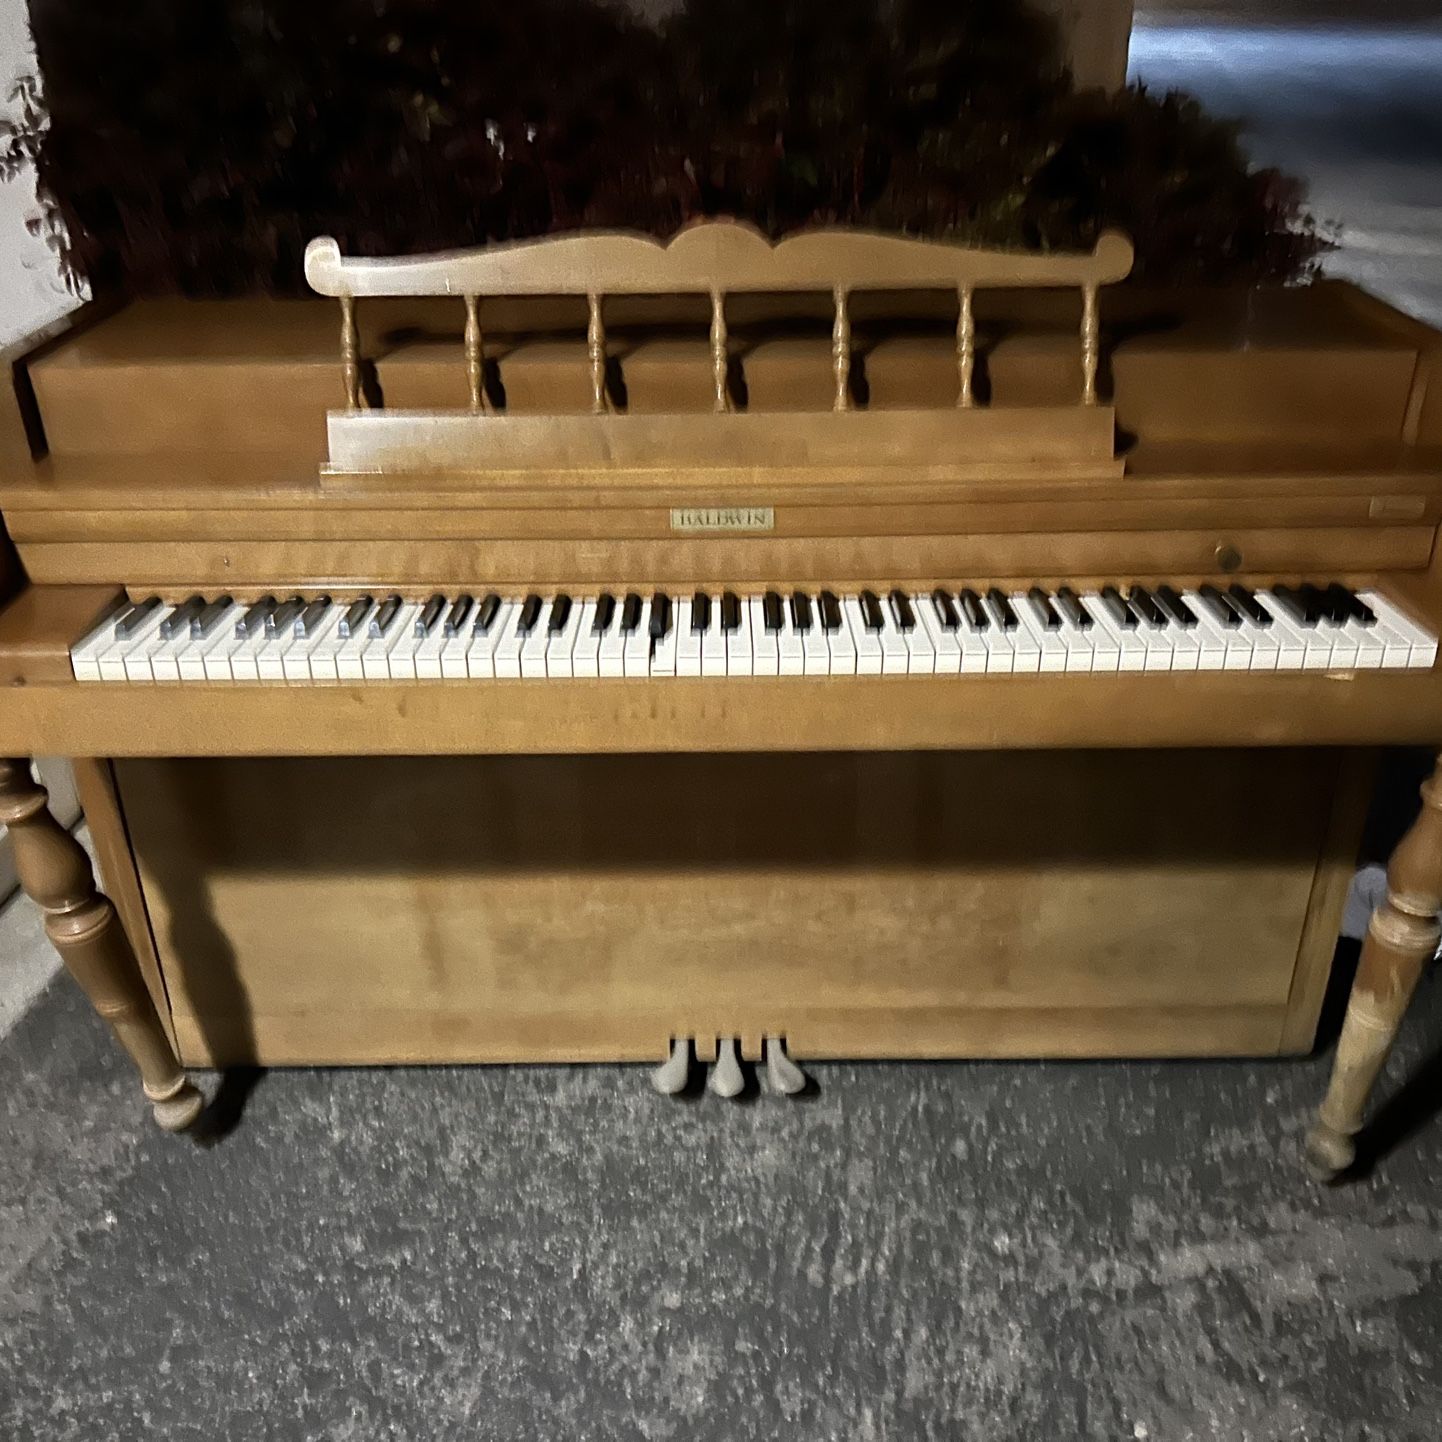 Selling used Piano For cheap!!